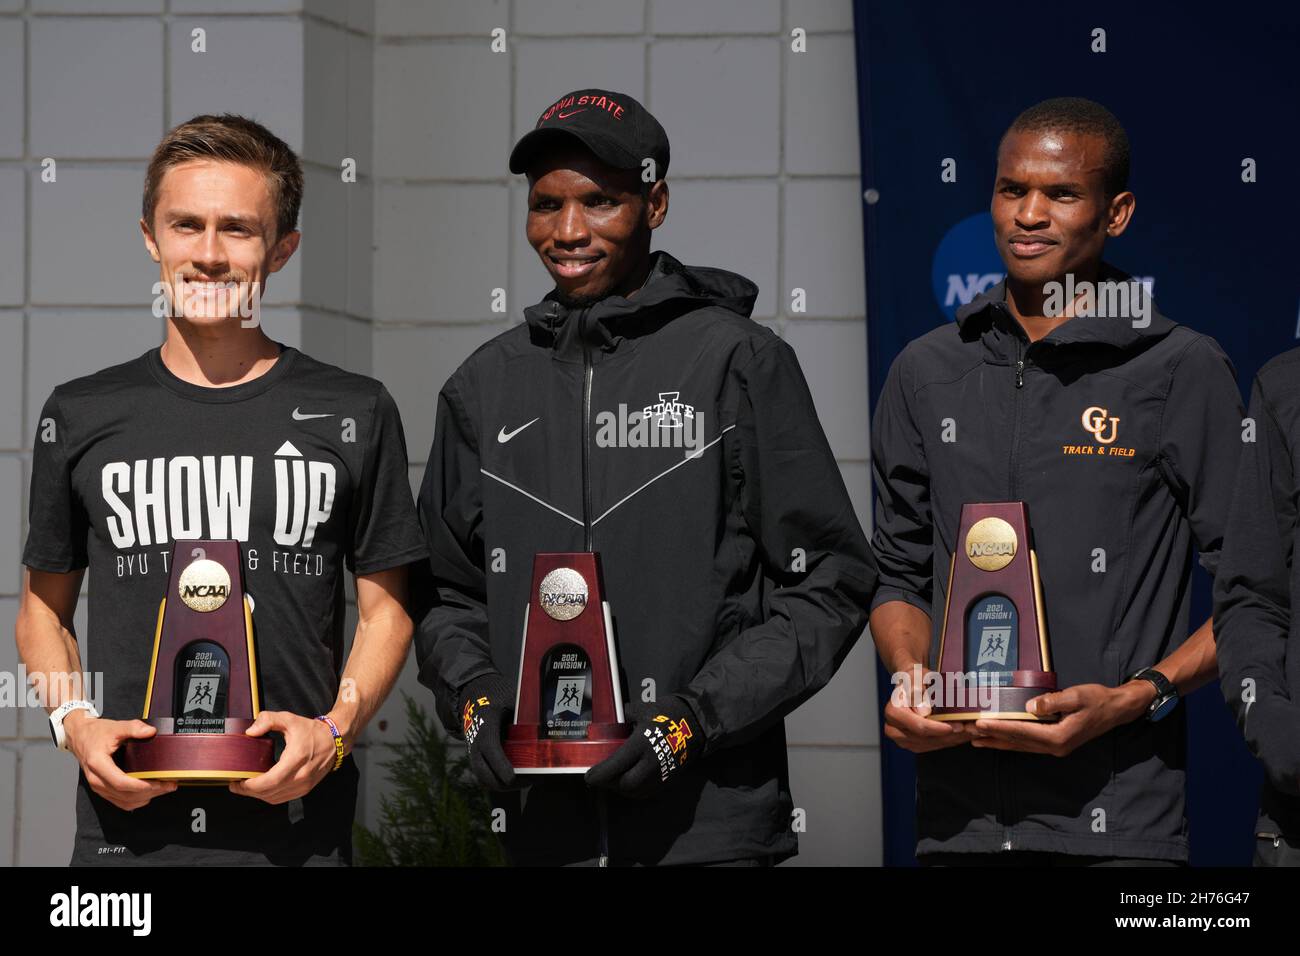 Conner Mantz of BYU (left), Wesley Kiptoo of Iowa State (center) and Athanas Kioko of Campbell pose after placing first, second and third in the men's Stock Photo